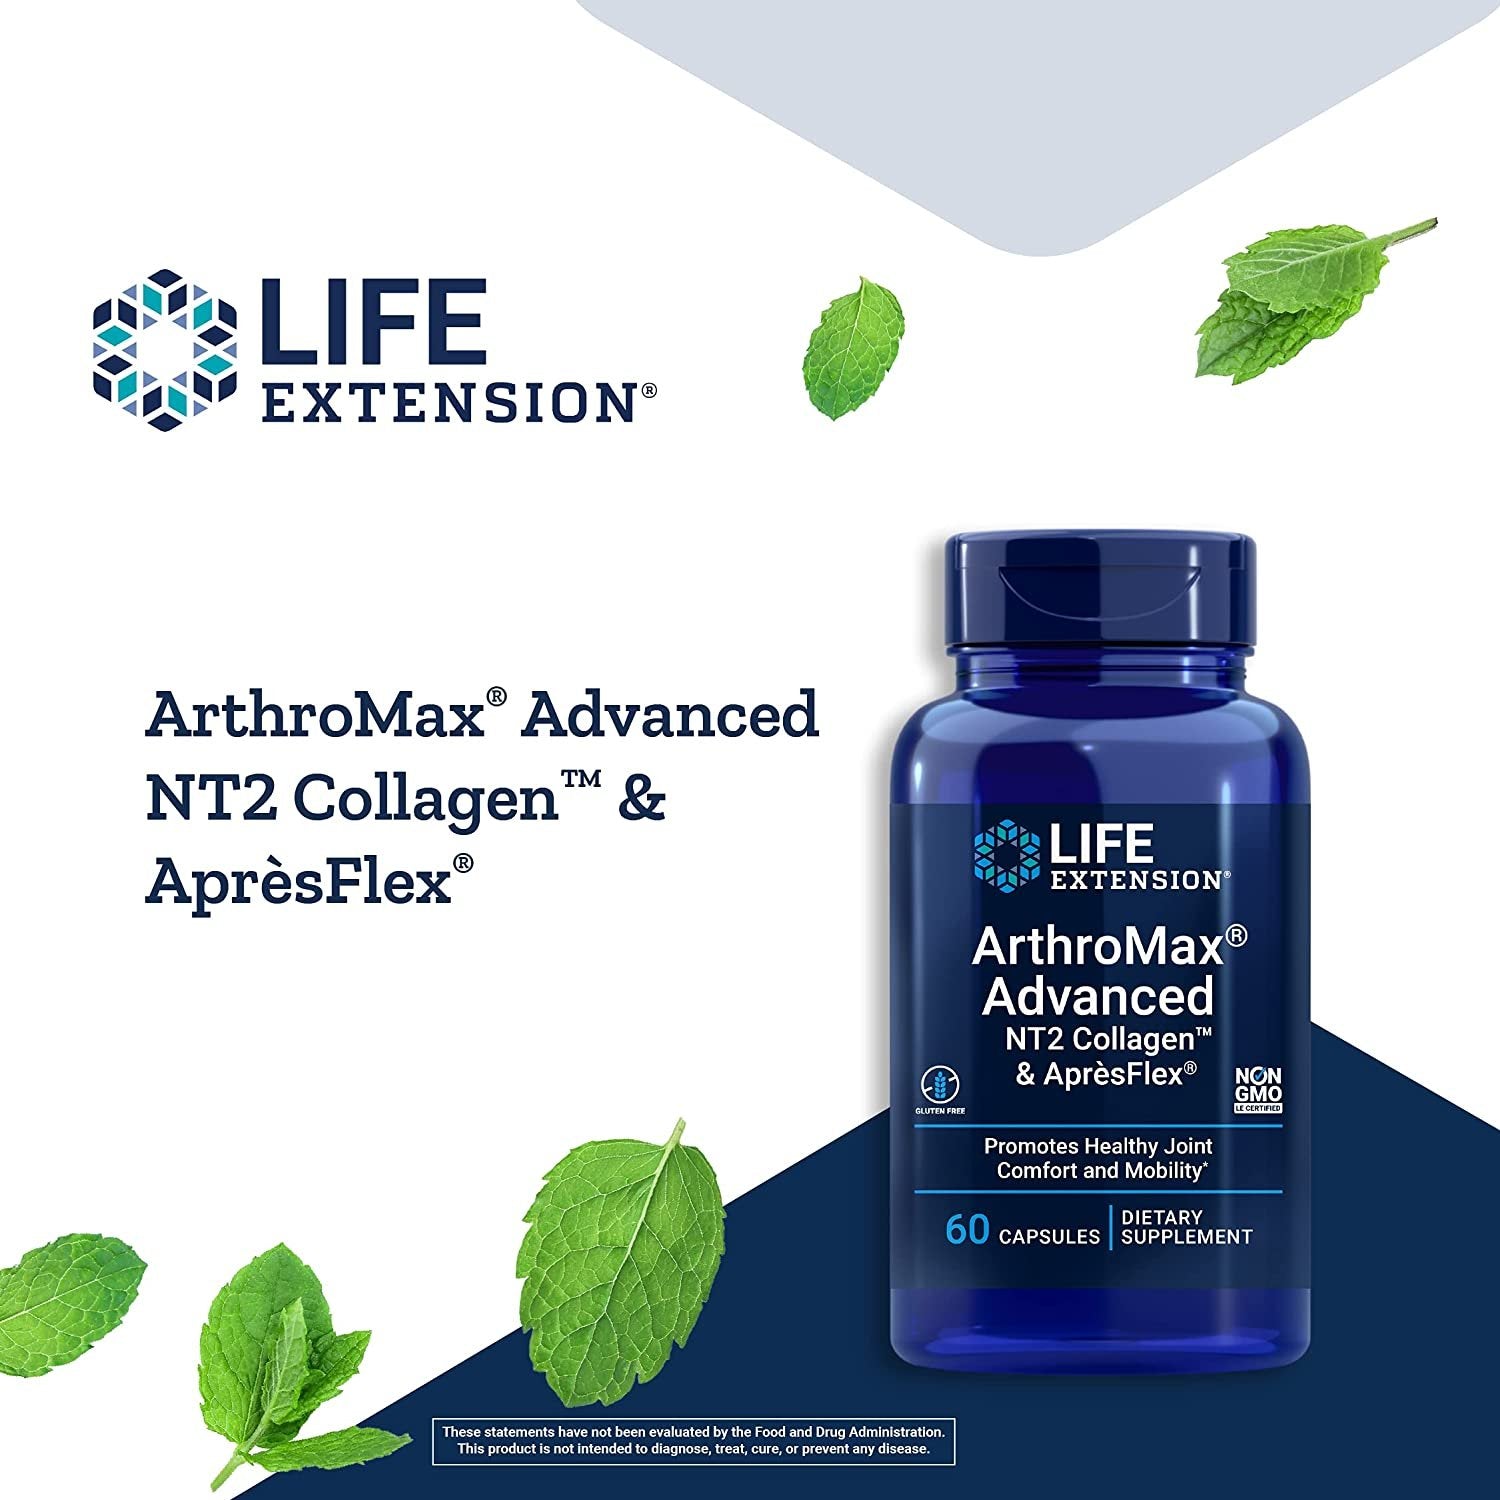 Life Extension ArthroMax Advanced with NT2 Collagen & AprèsFlex Capsules, Our Joint Health, Comfort & Mobility Formula, Non-GMO, Gluten-Free, 60 Count